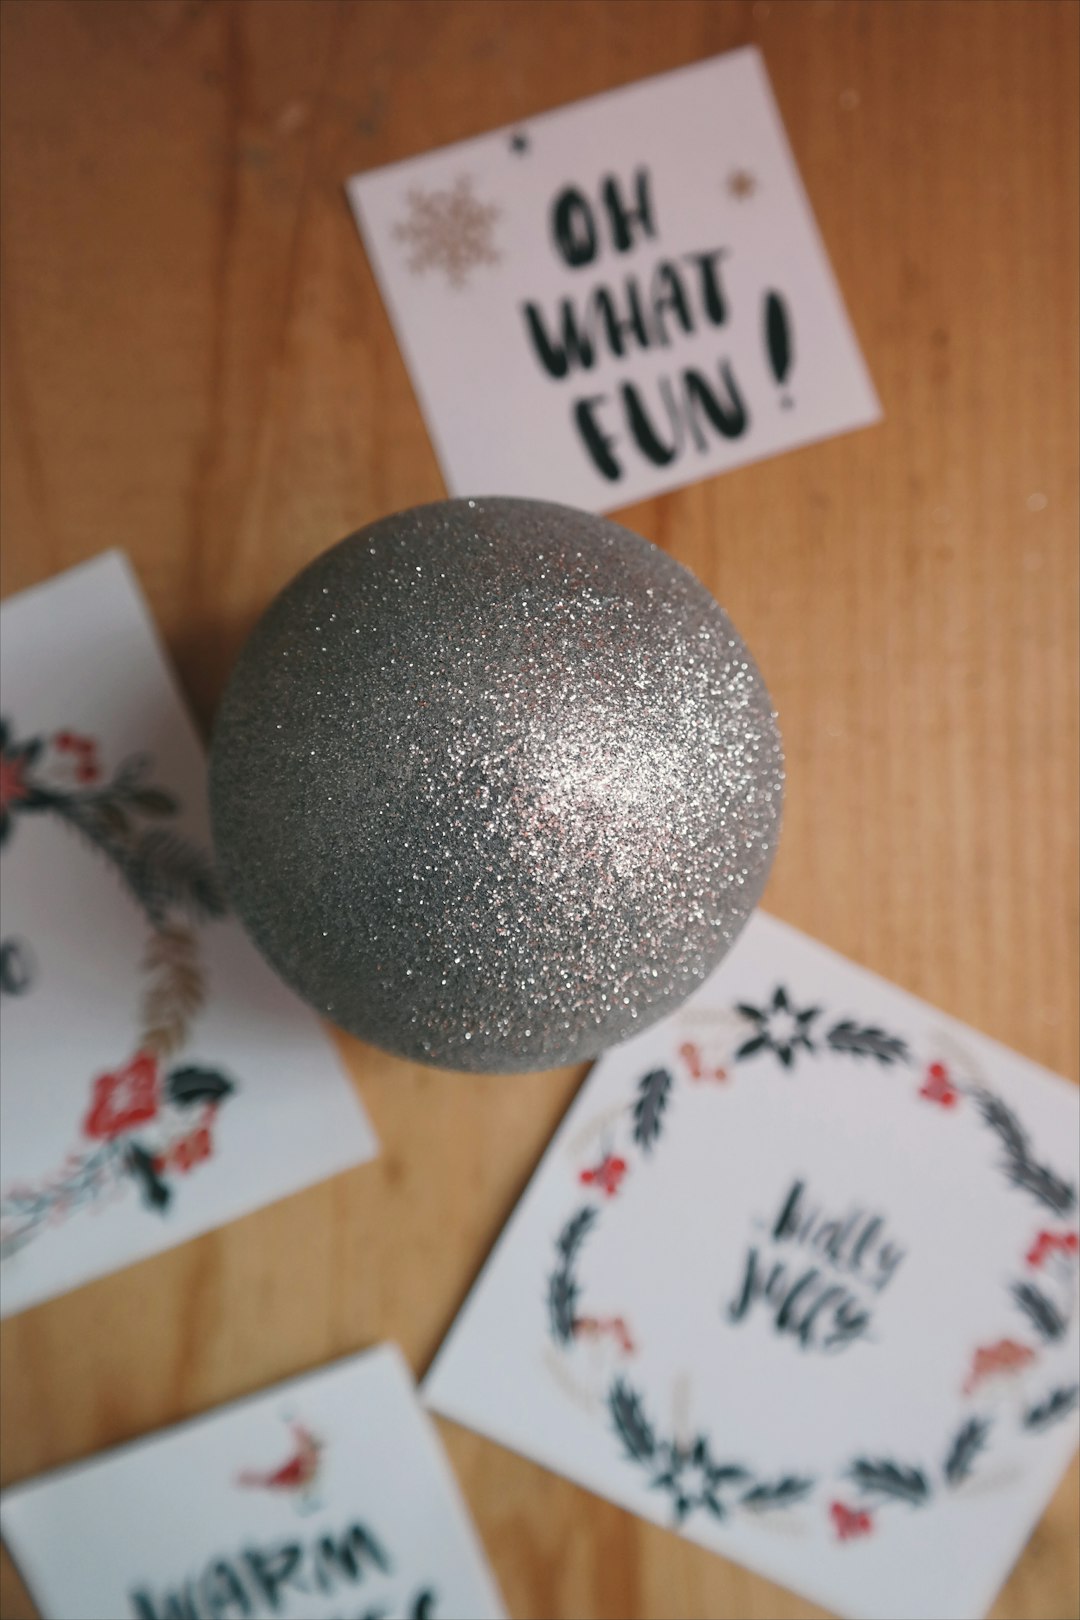 A gray Christmas ornament sitting on the floor next to little notes.